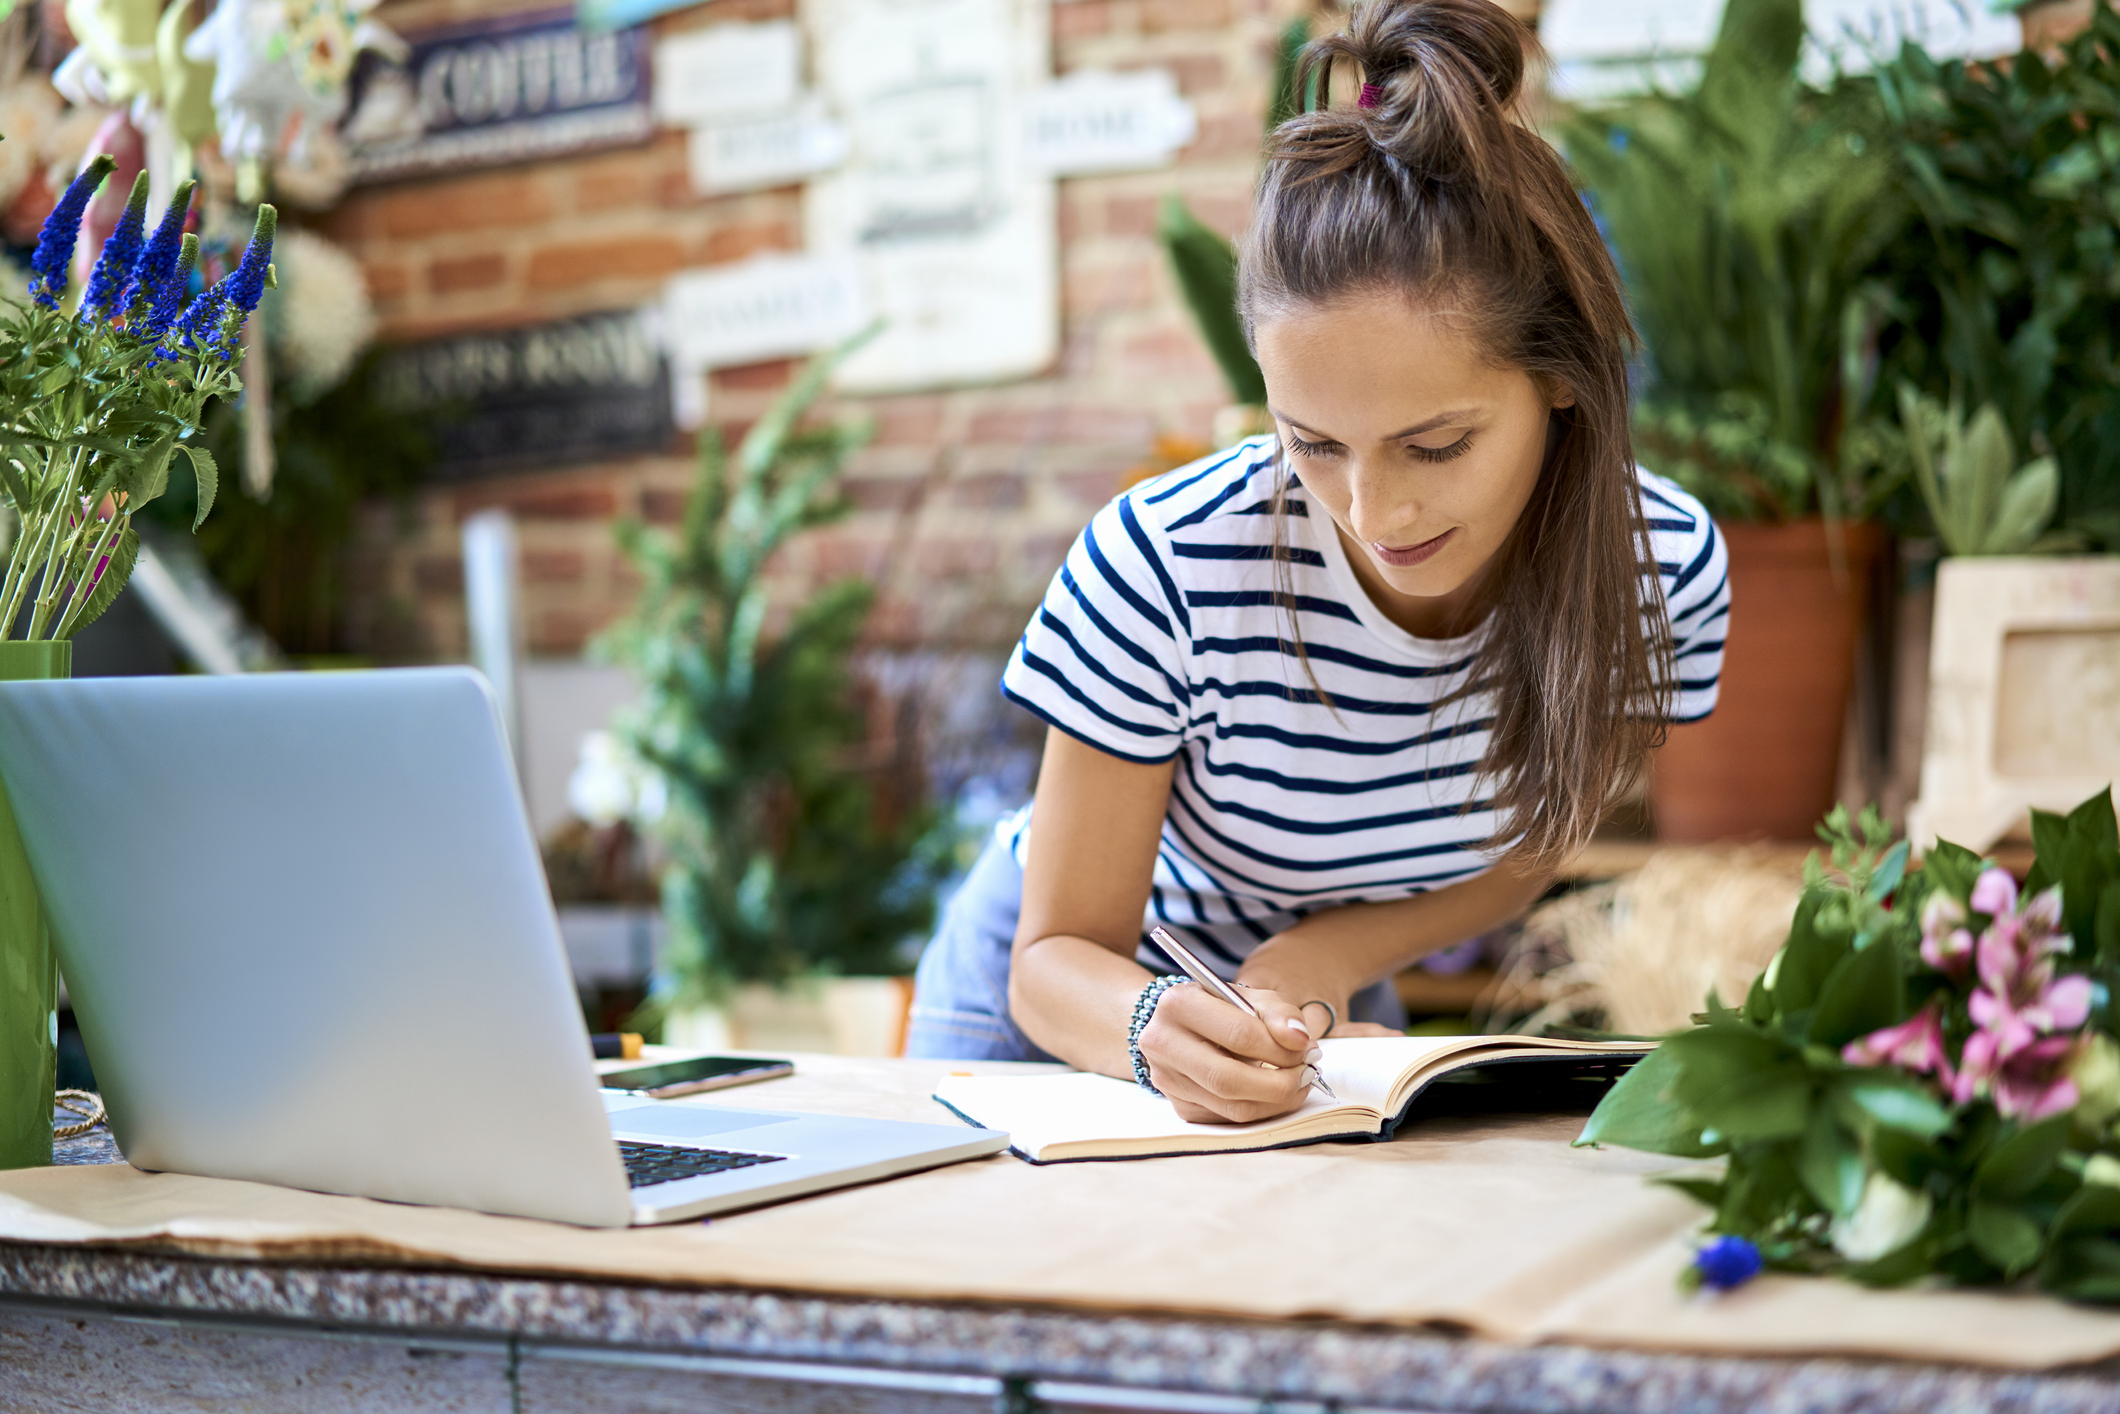 Young, female florist writing out the costs of launching her new brand in her flower shop alongside her laptop. She is wearing a black and white striped top.